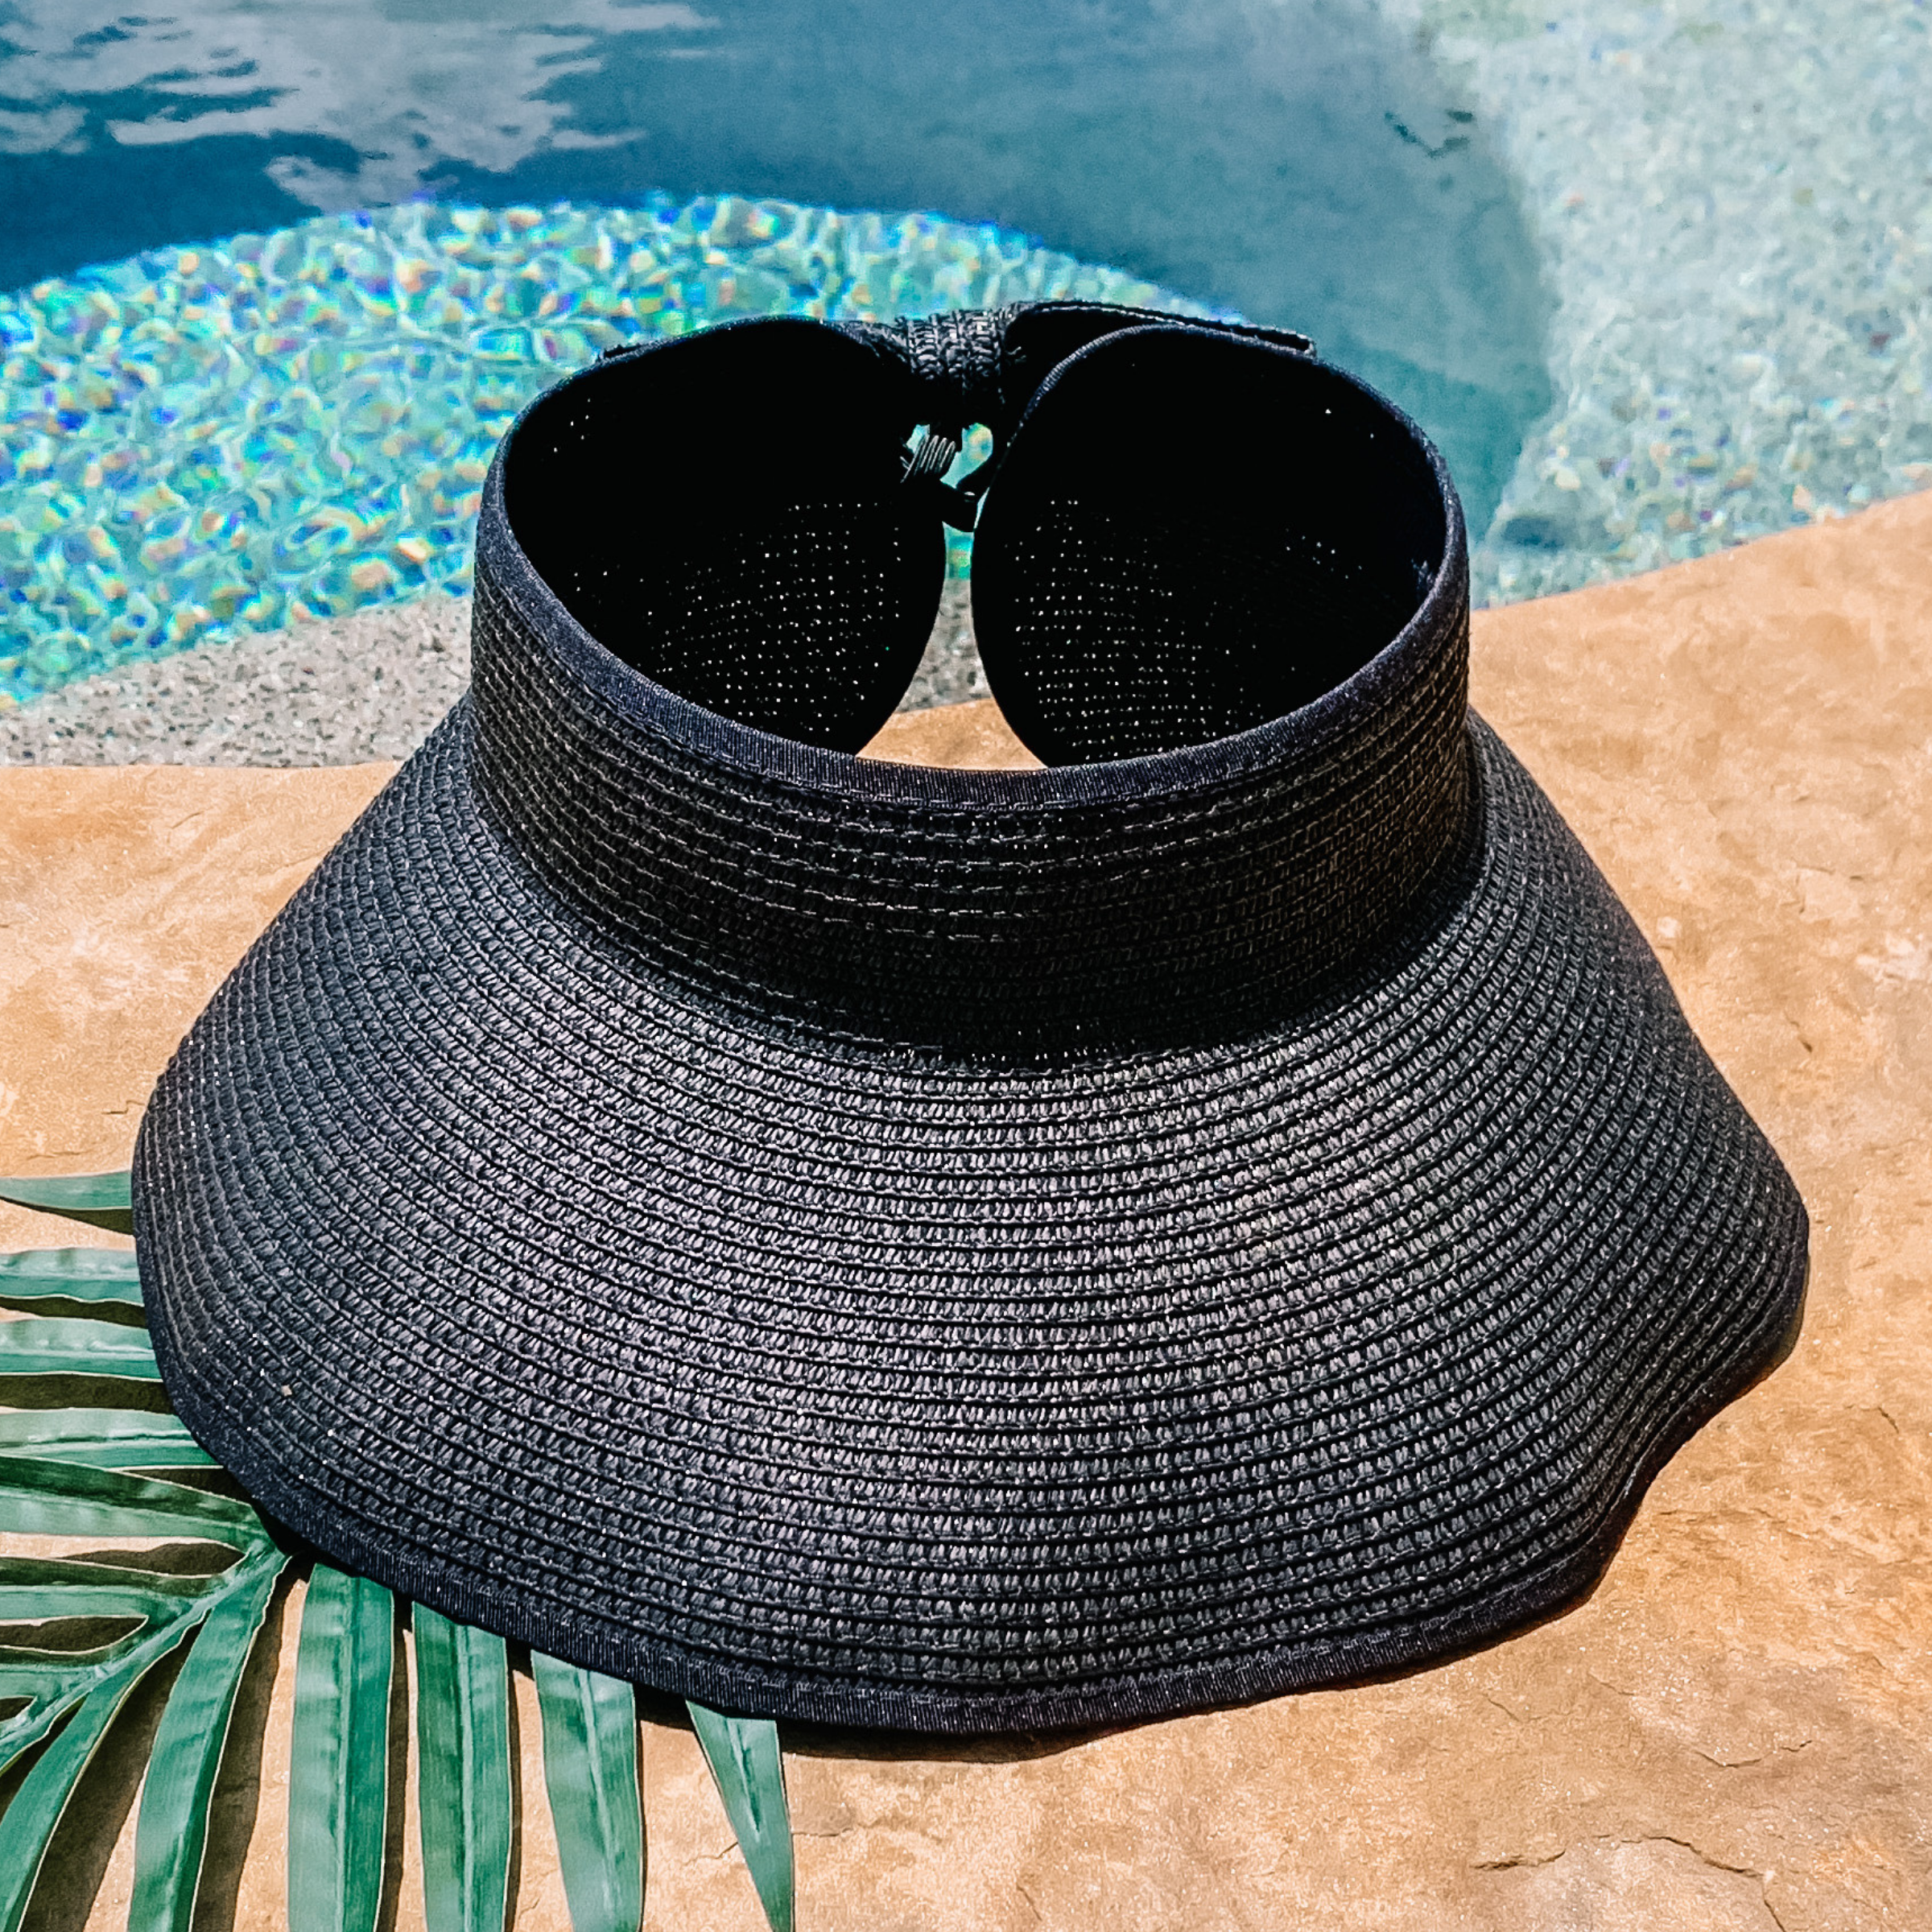 Black, woven velcro visor that is pictured with a green leaf under it. This visor is pictured on a a tan rock in front of a pool.